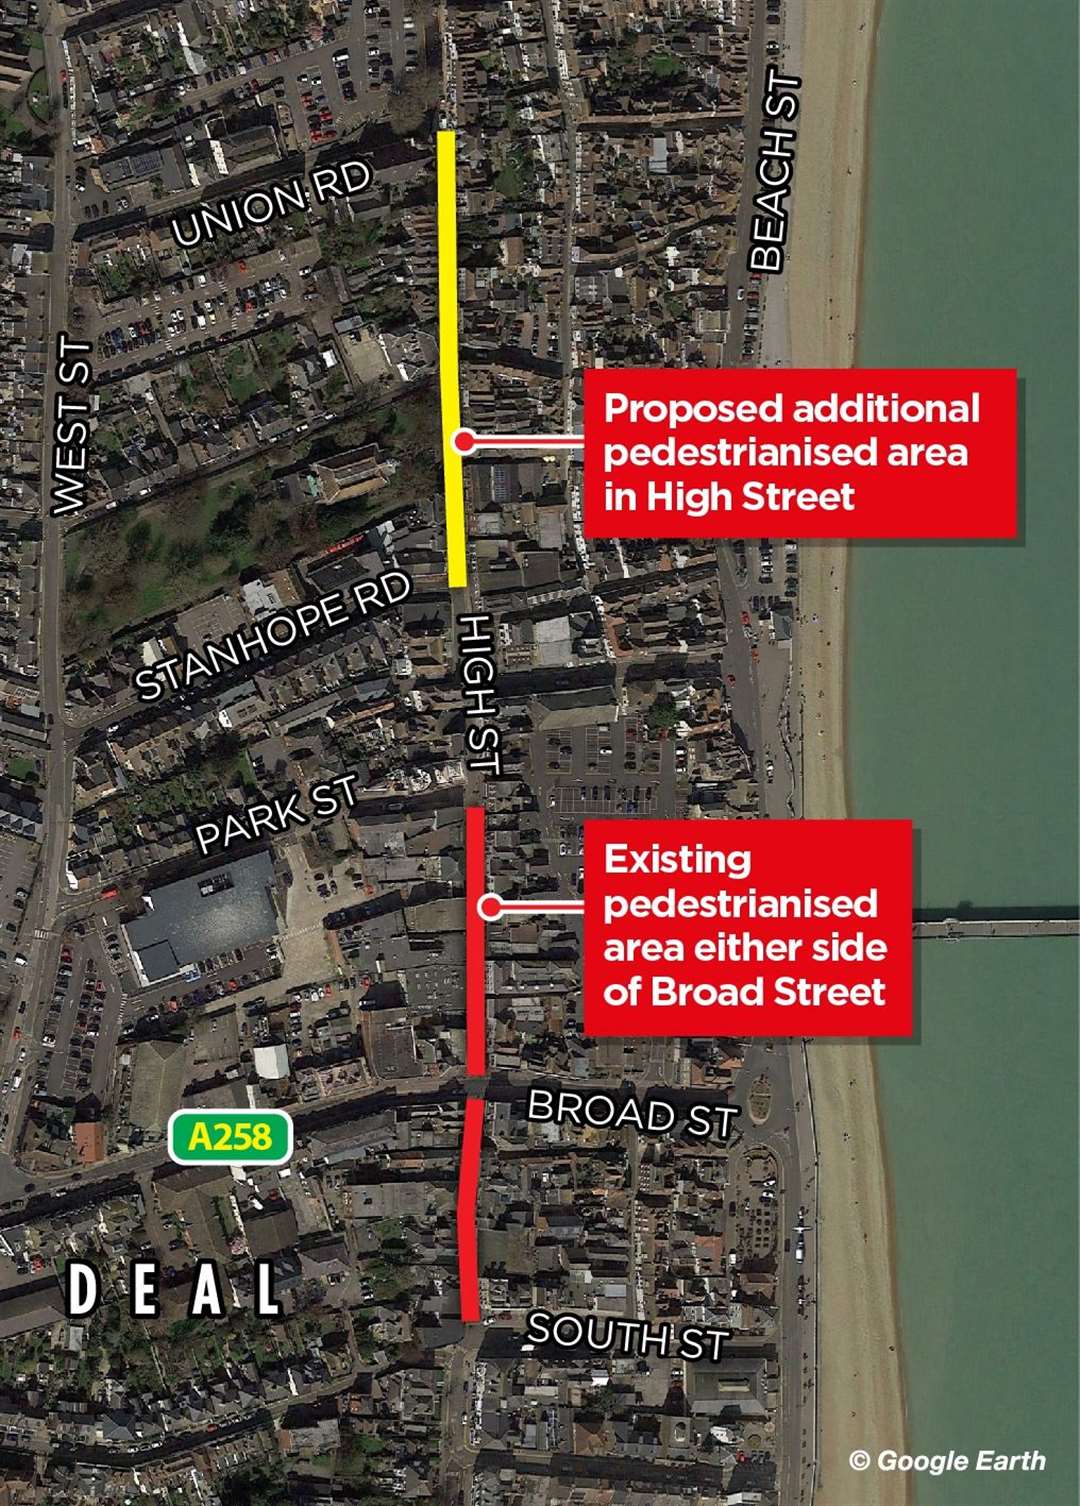 Deal Town Council is set to launch a public consultation over the proposed changes